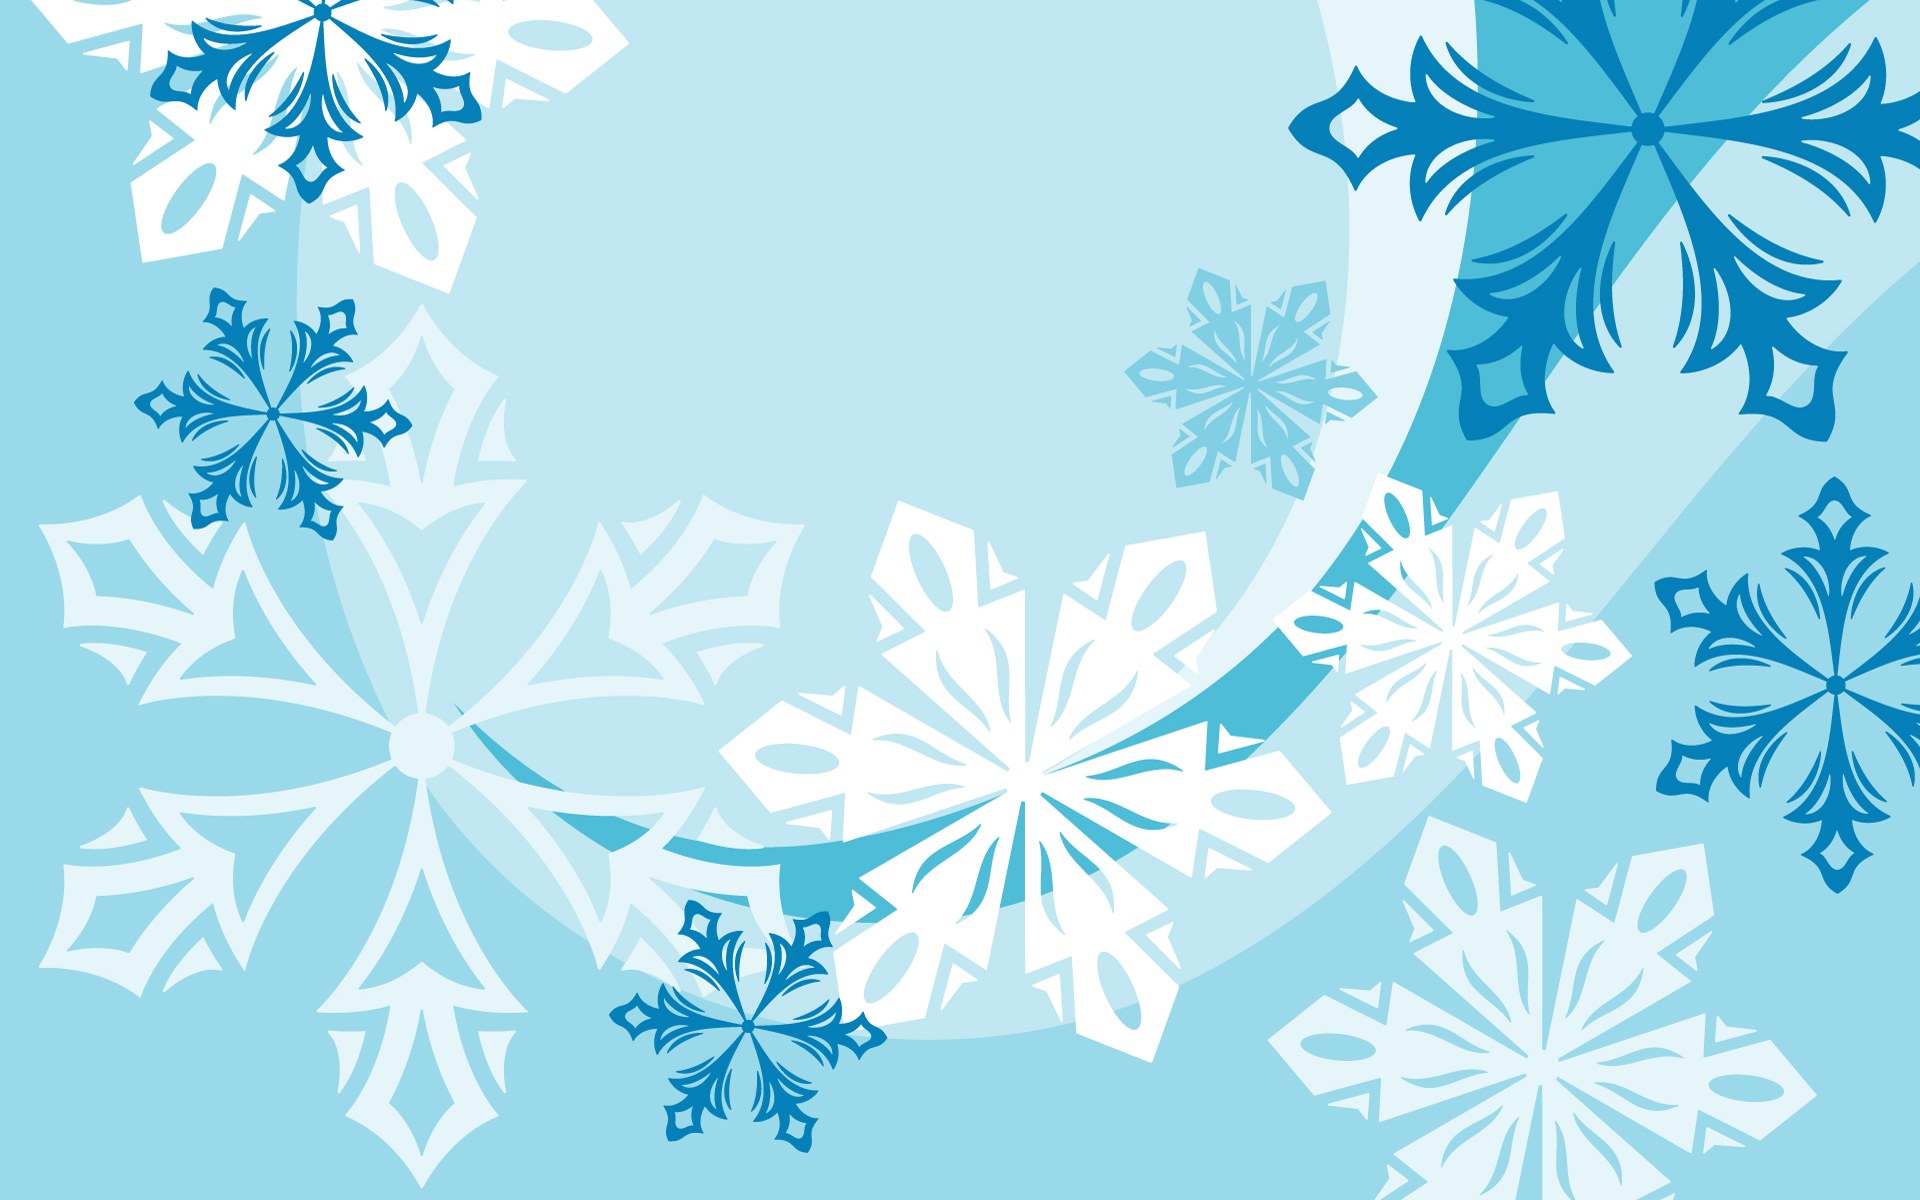 Free Winter Backgrounds | Wallpapers, Backgrounds, Images, Art Photos.